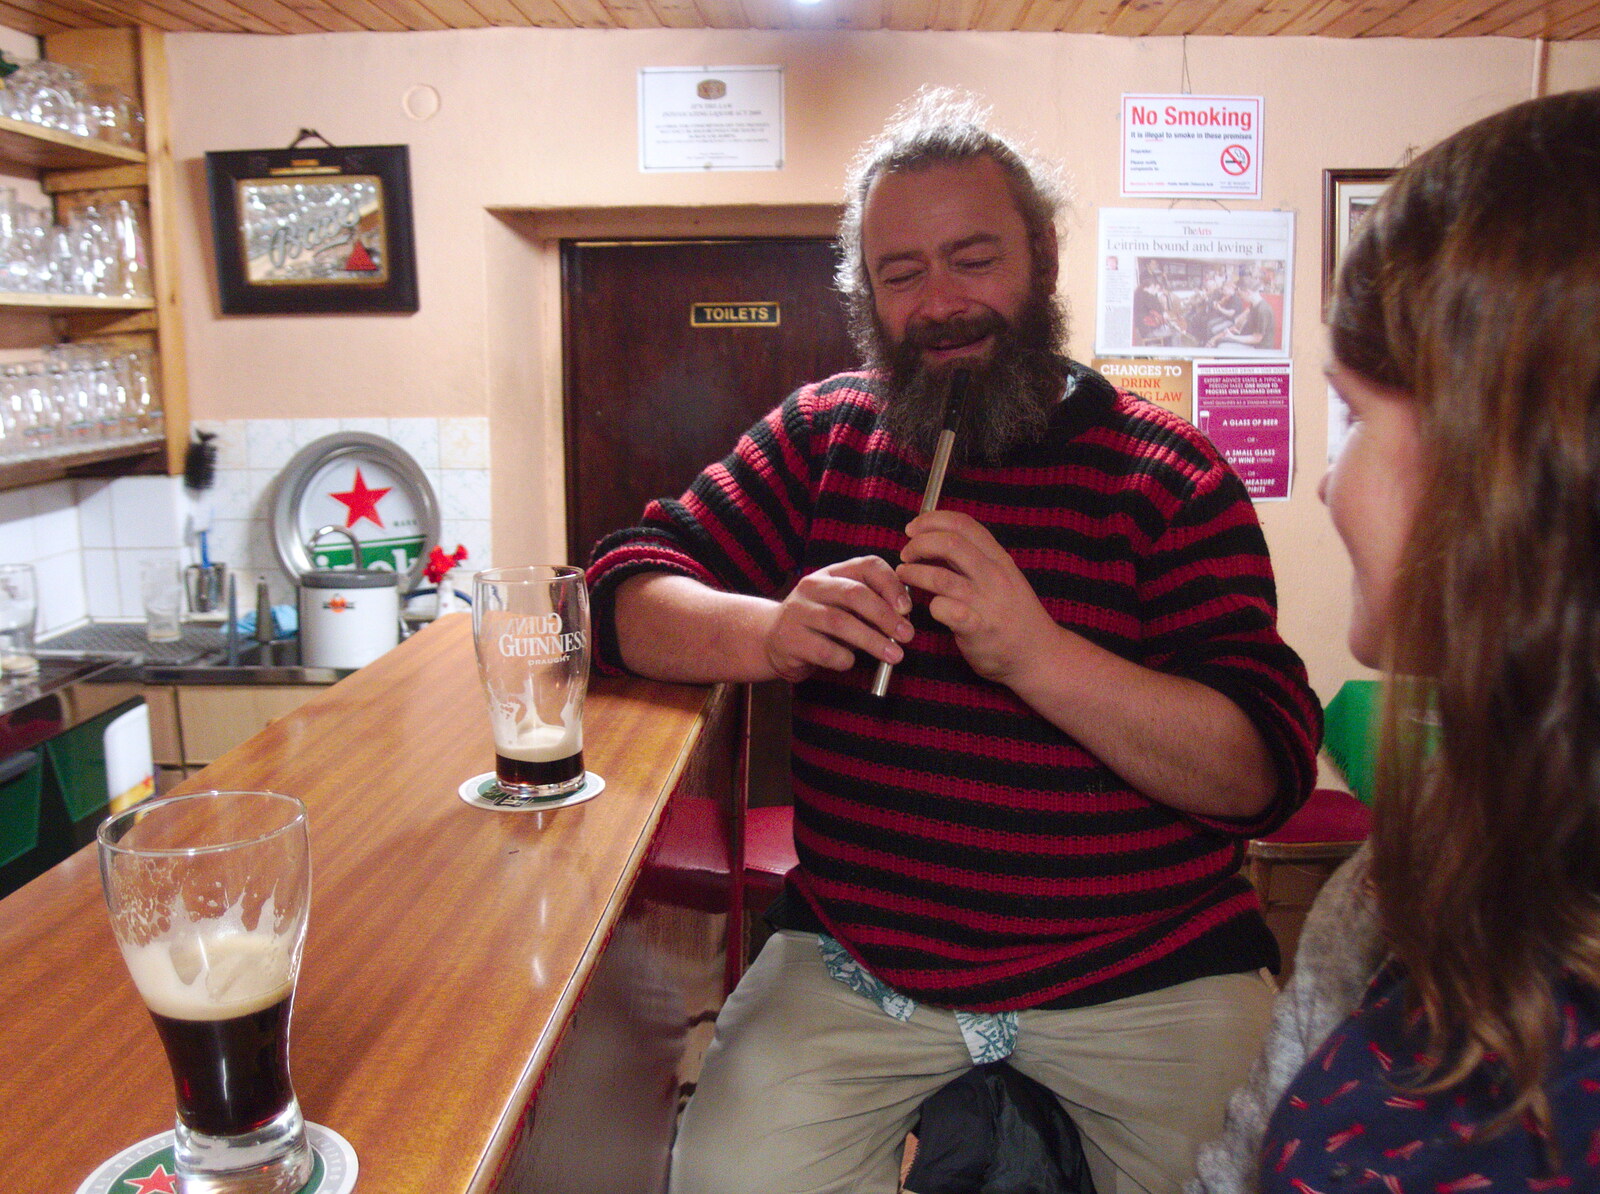 Noddy's on tin whistle in Connolly's Bar from Florence Court and a Postcard from Sligo, Fermanagh and Sligo, Ireland - 21st August 2019